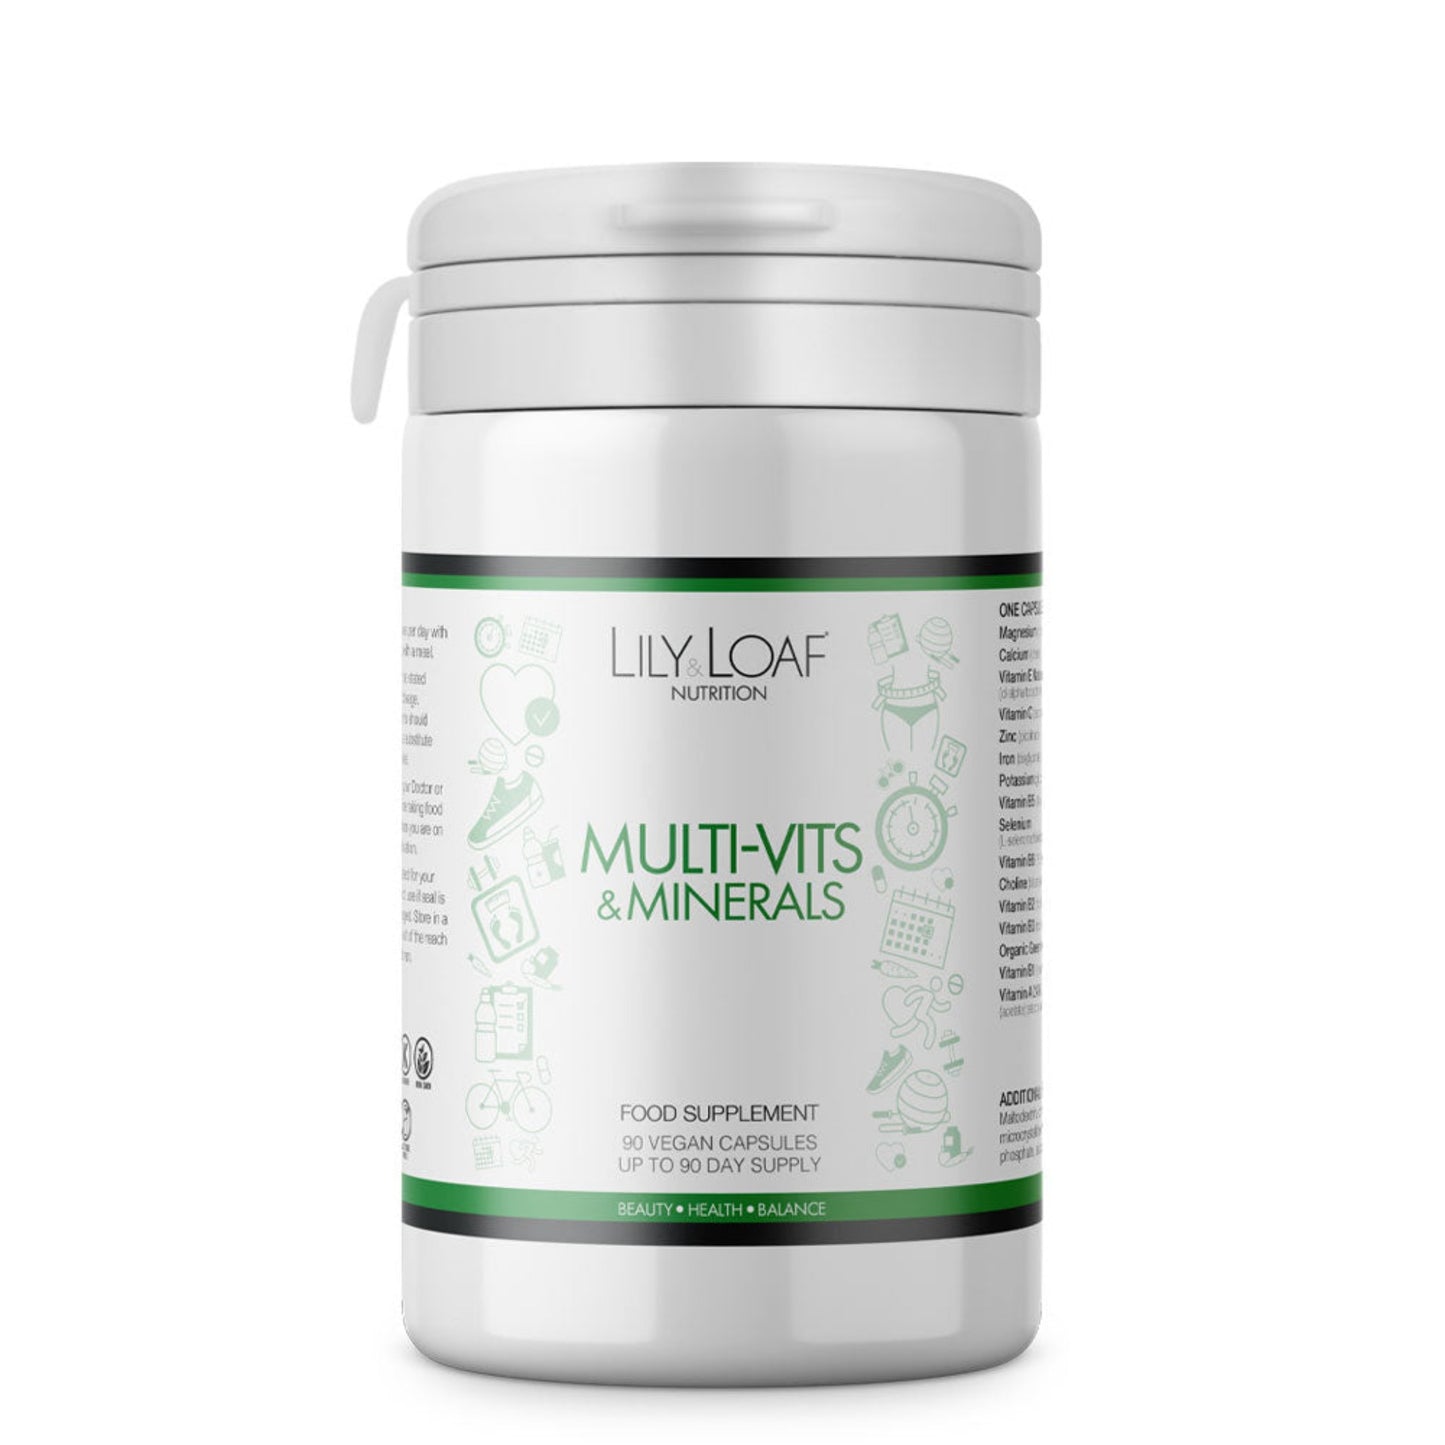 Lily & Loaf Multi-Vits & Minerals supplement bottle with 90 vegan capsules, providing a comprehensive blend of vitamins and minerals for overall health.